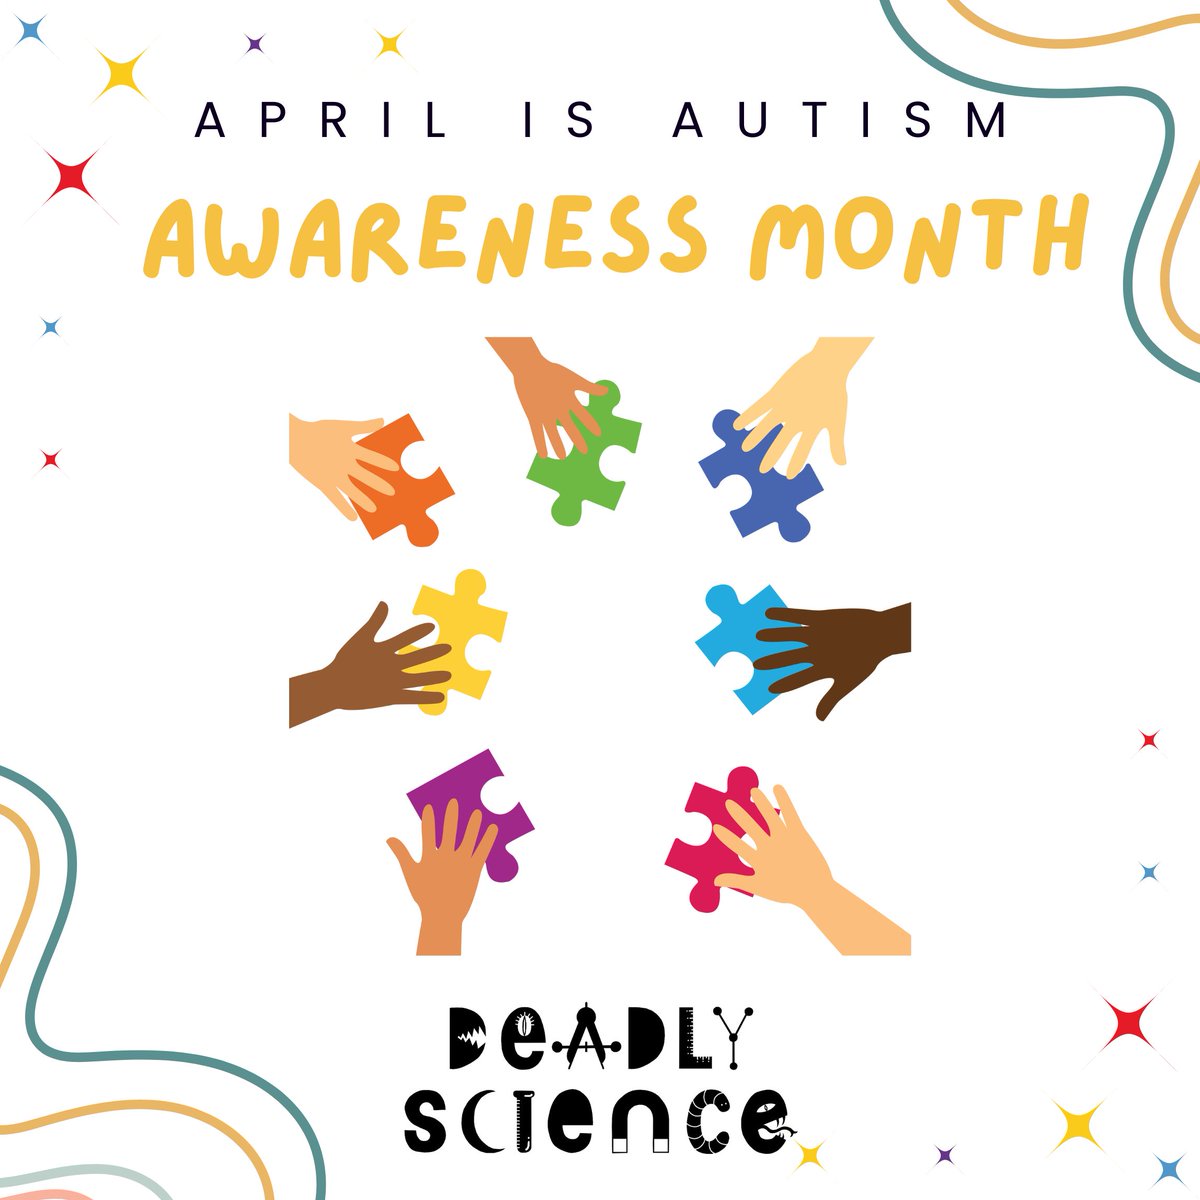 April is Autism Awareness Month! Let's celebrate the unique perspectives and talents of individuals on the autism spectrum and continue to promote understanding and acceptance for all. 💜 Providing Autism support in First Nations communities: ow.ly/IOpS50R80H9